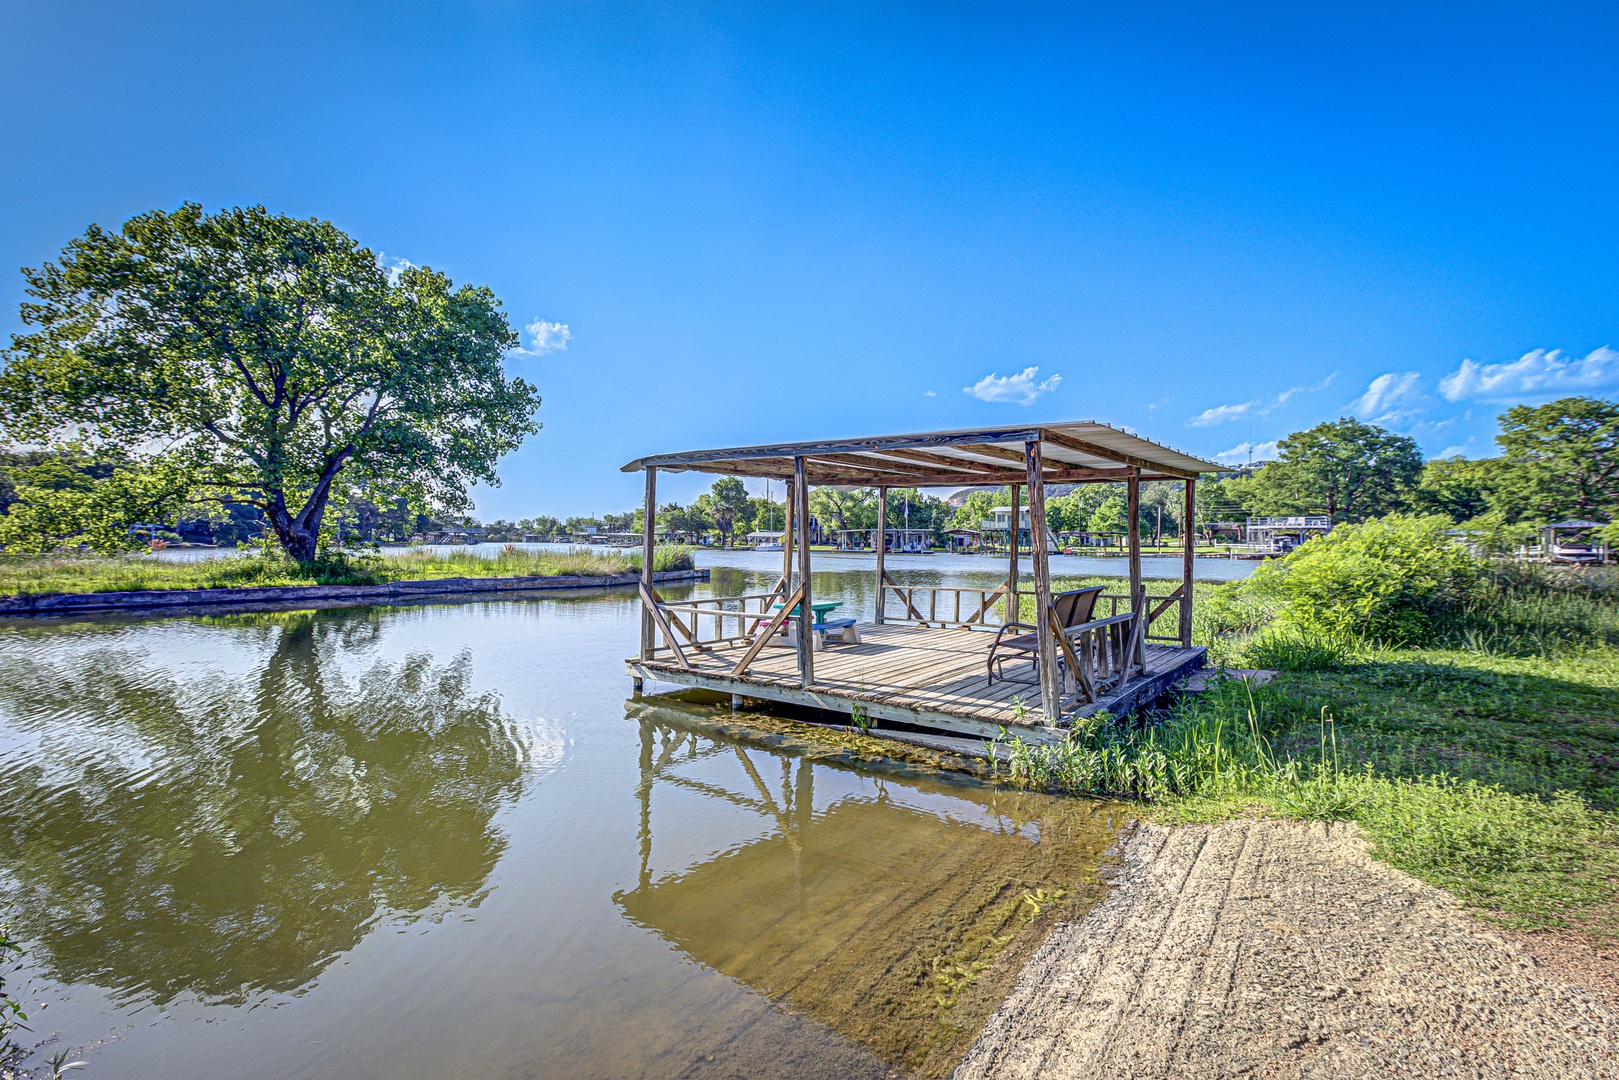 Enjoy a waterside picnic or an evening cocktail on the shared dock!